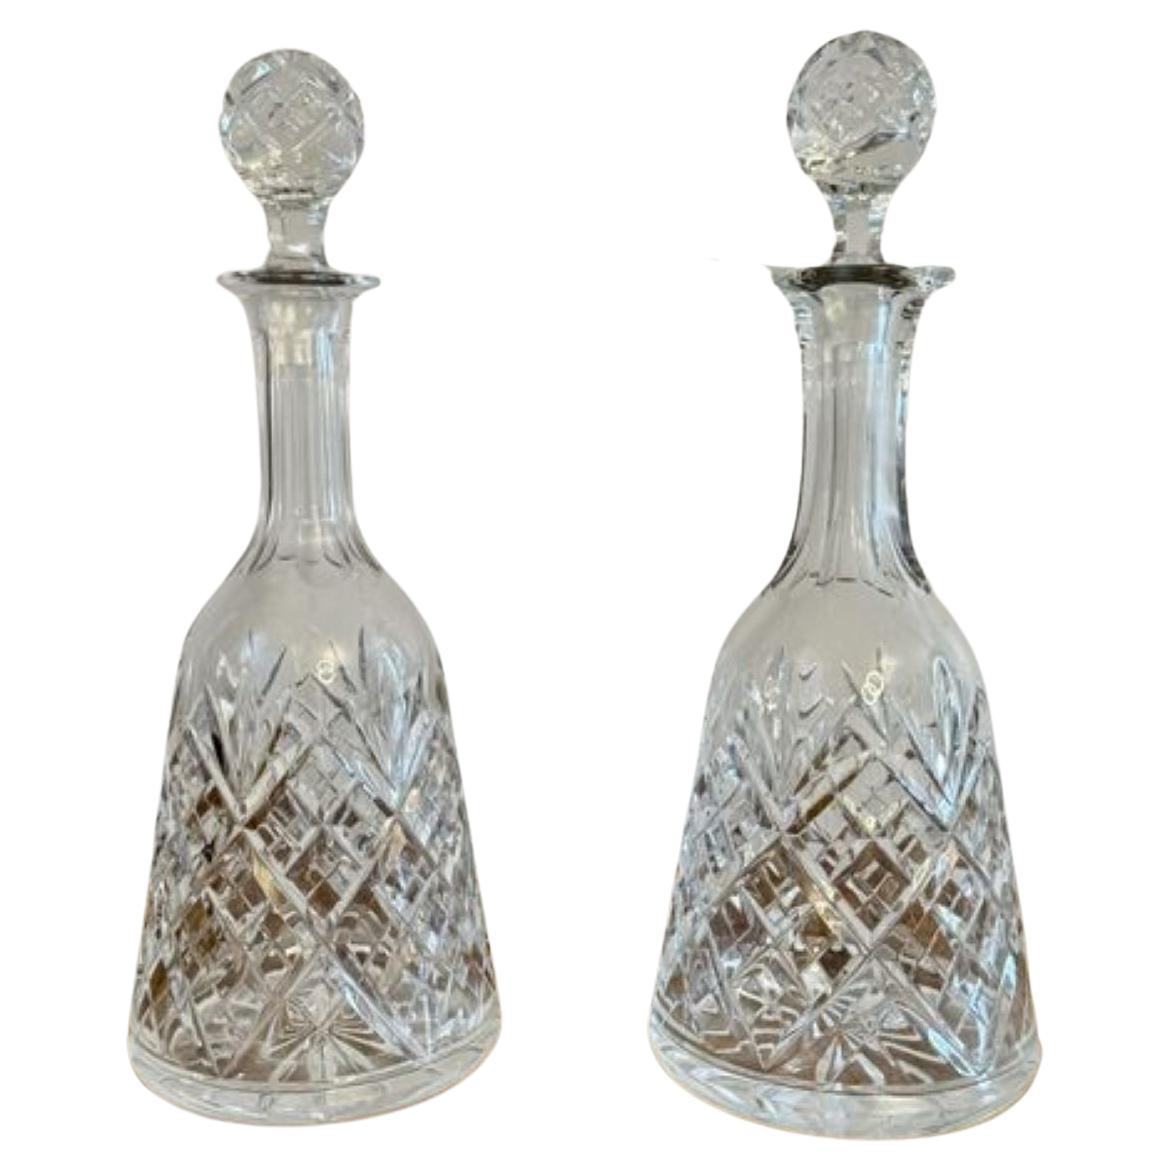 Lovely pair of antique Edwardian bell shaped decanters 